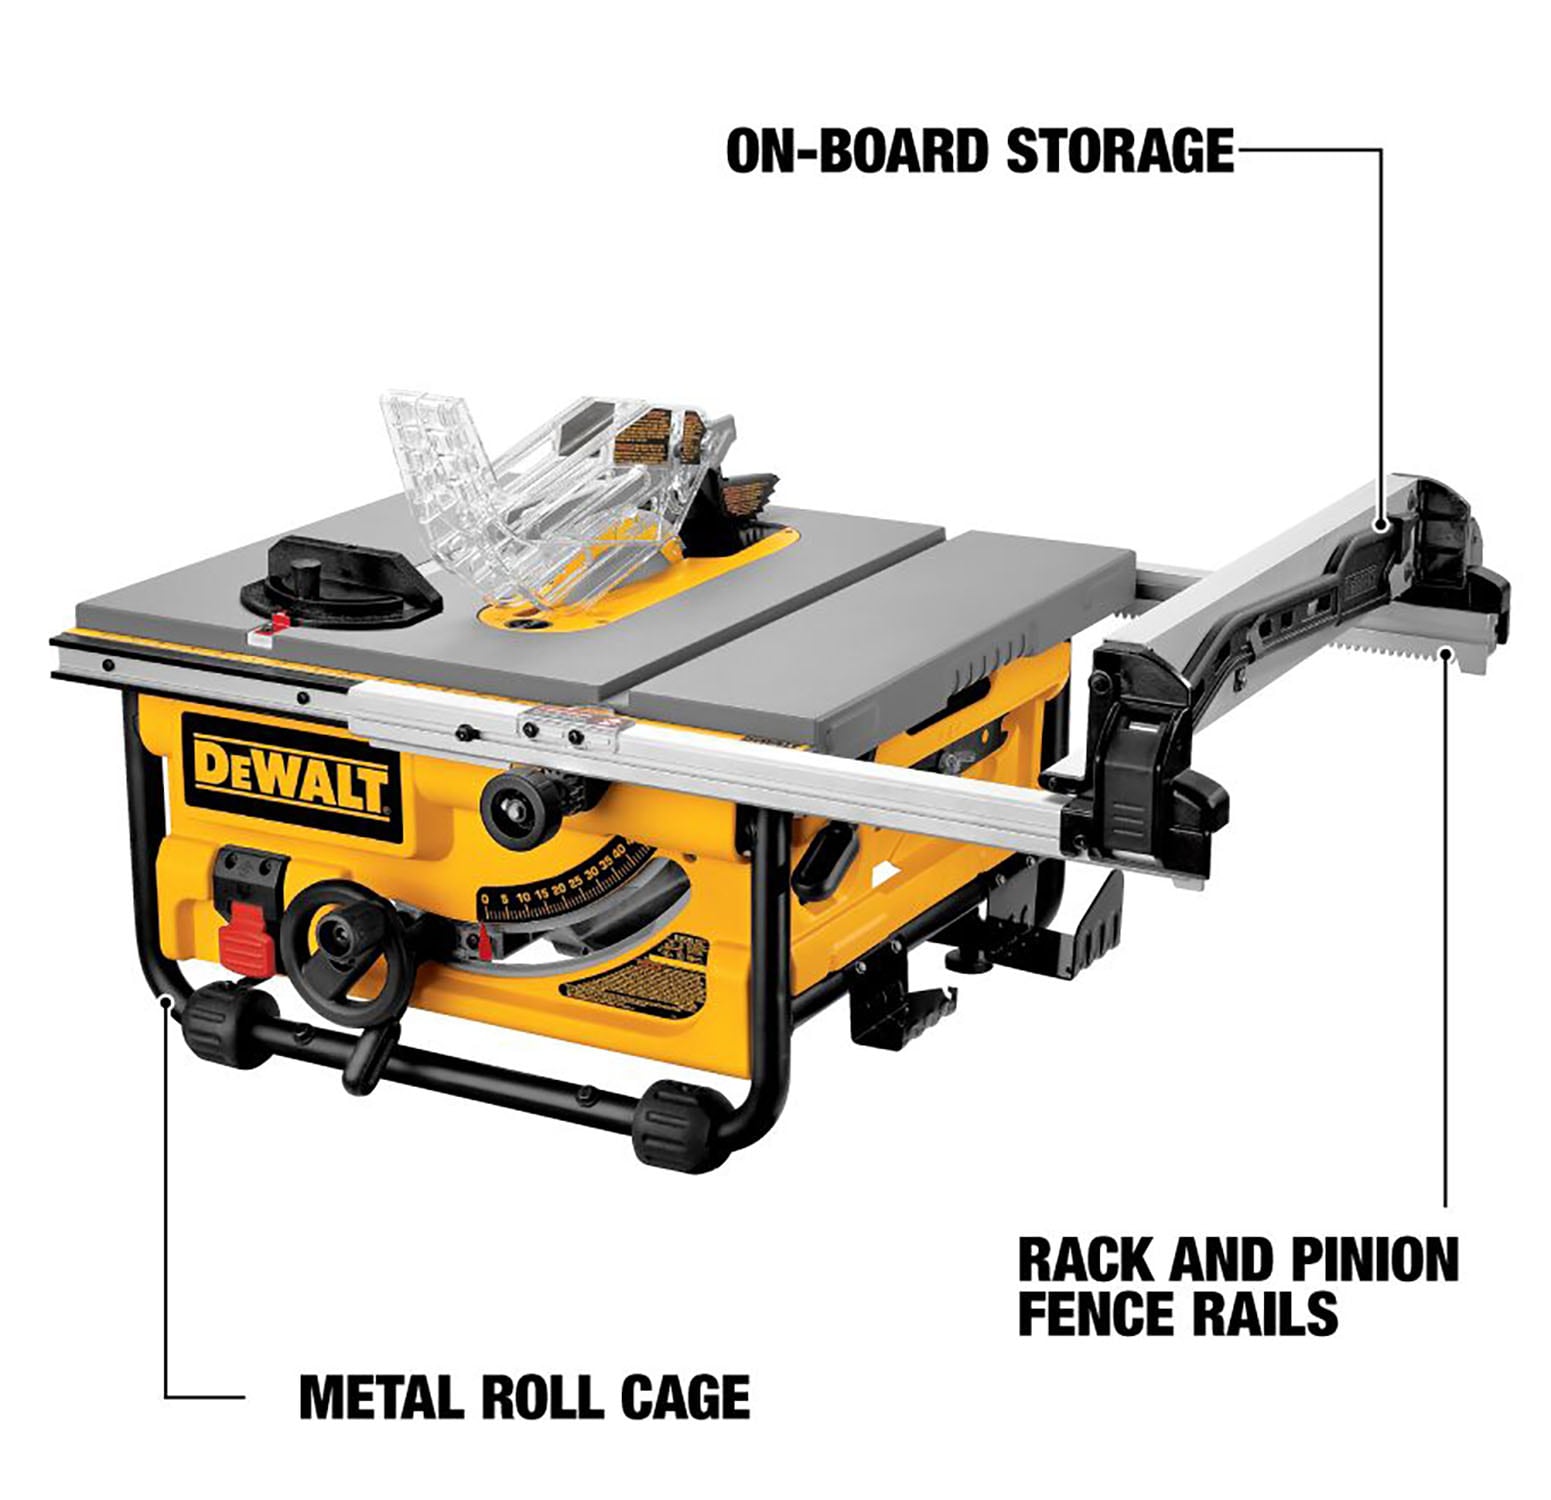 DEWALT 10-in 15-Amp 120-Volt Corded Benchtop Table Saw with